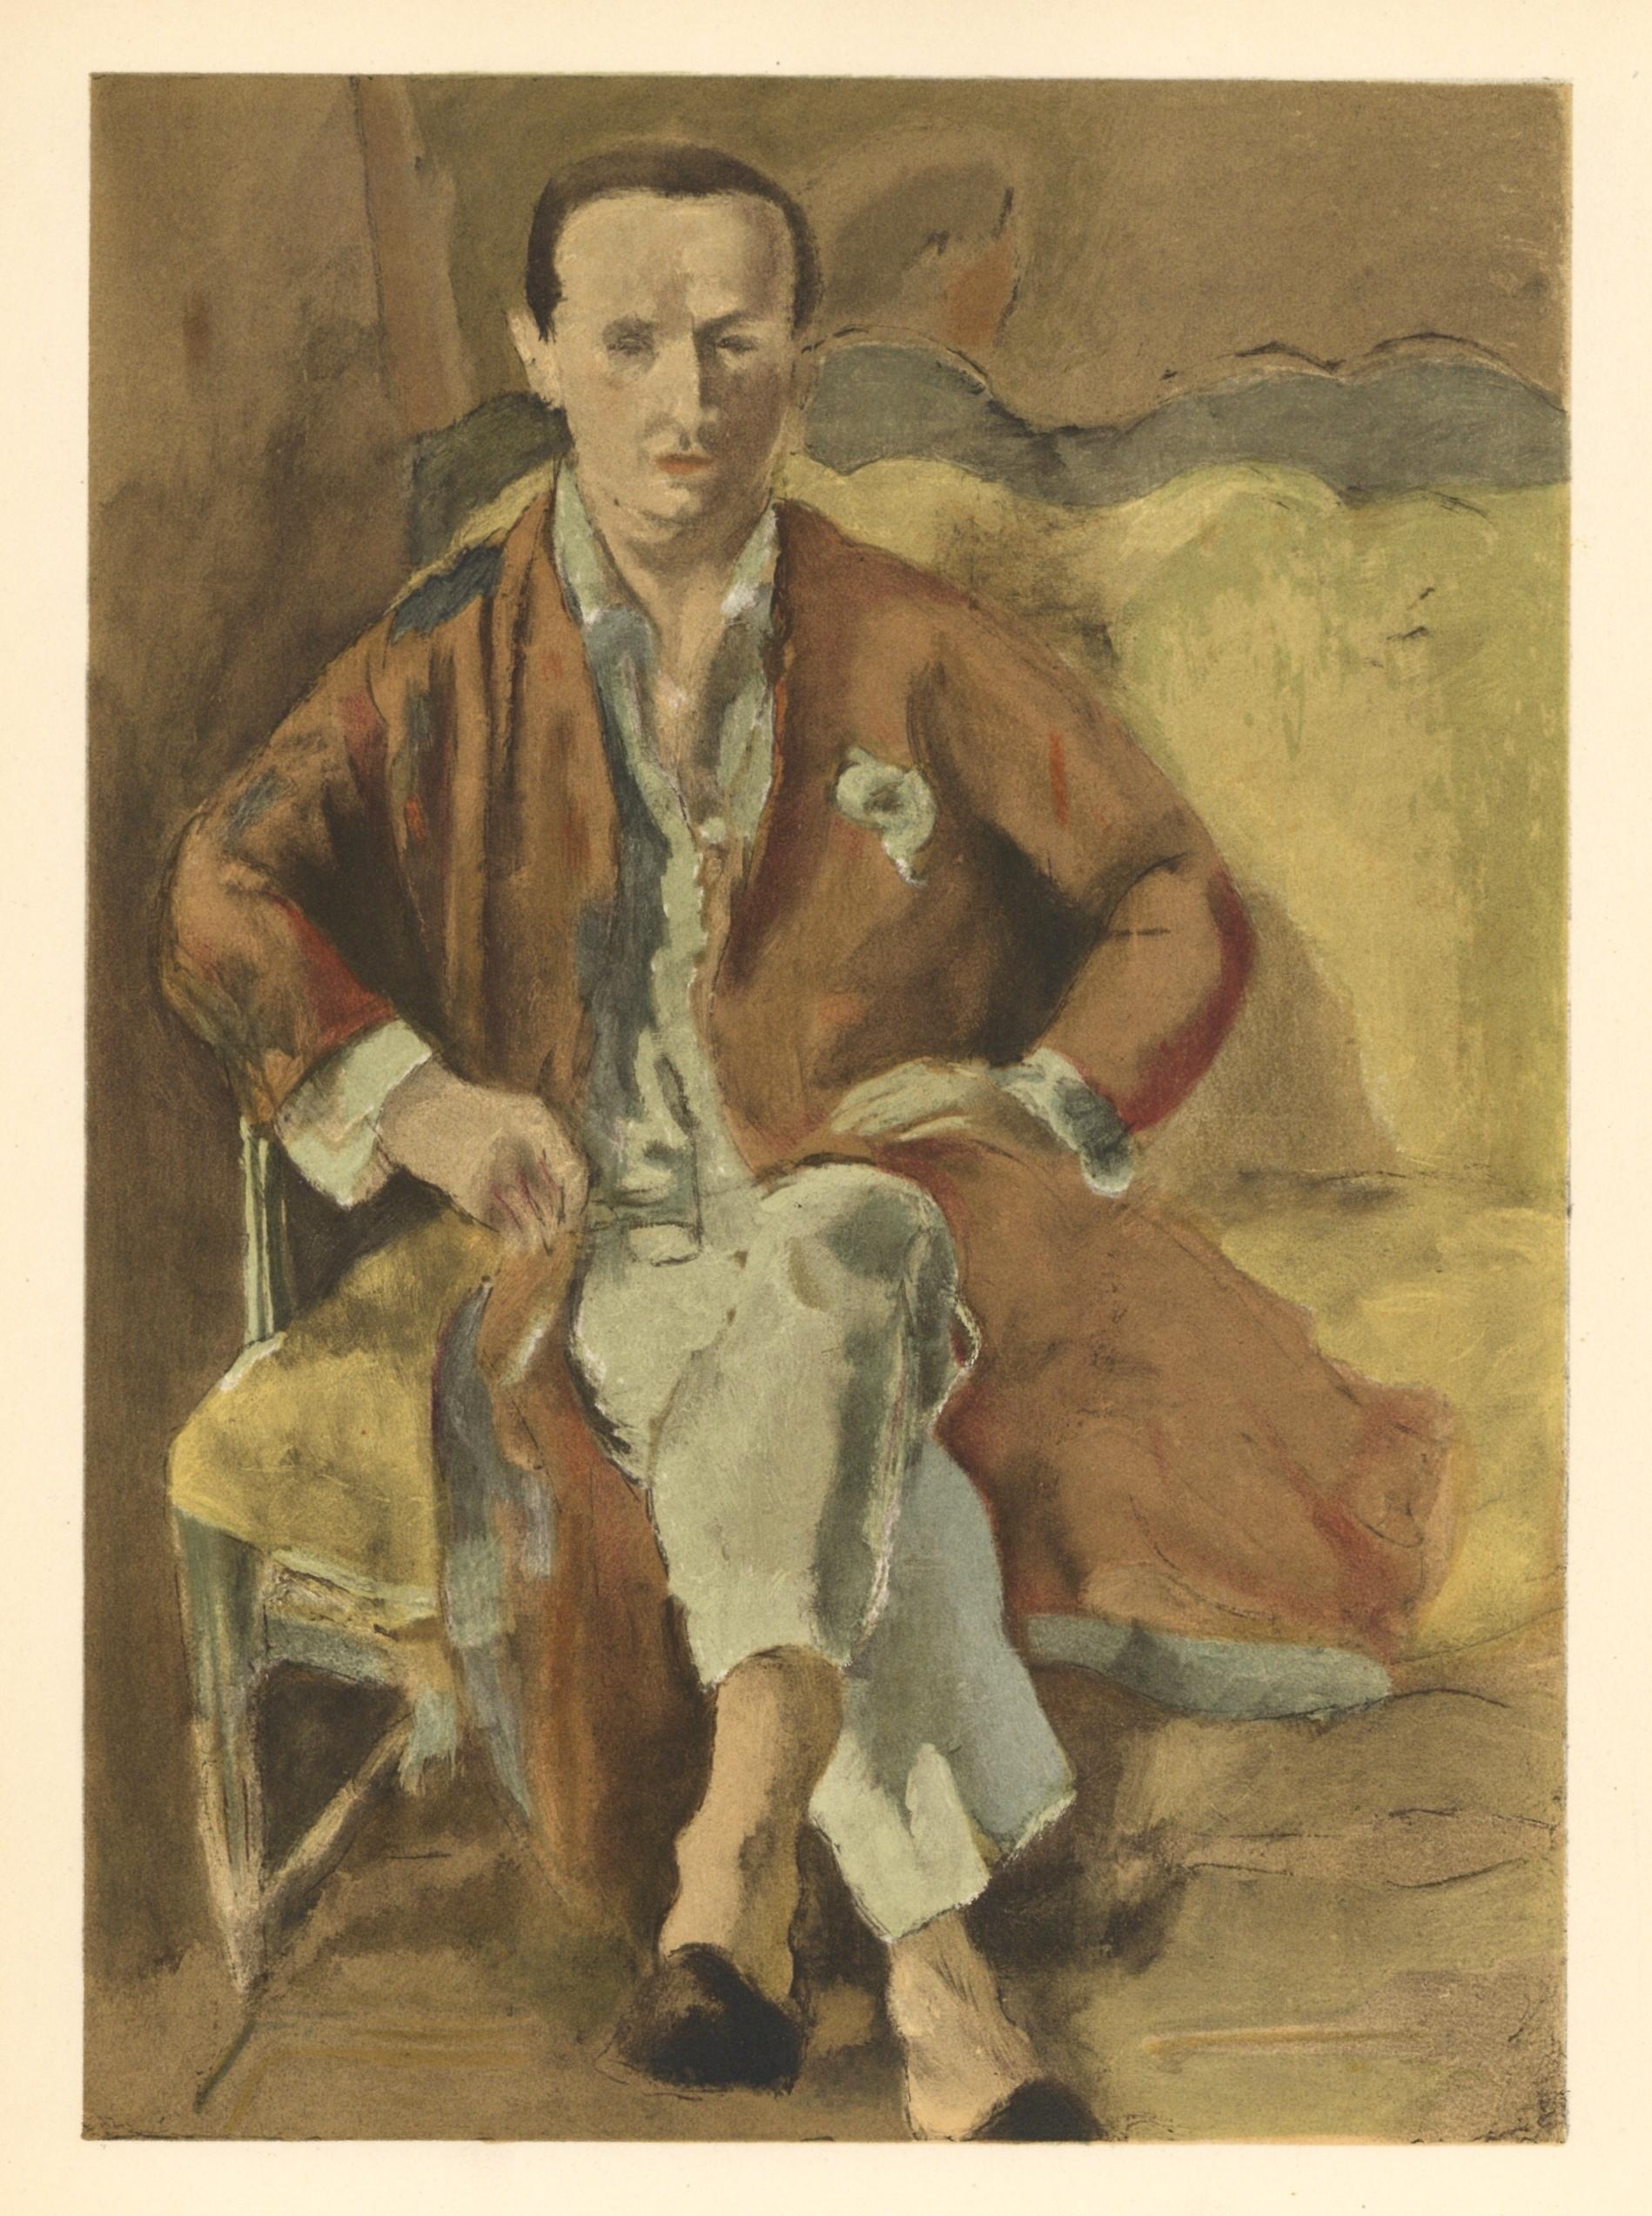 Medium: lithograph (after the painting). Printed in Paris in 1954 at the atelier of Mourlot Frères in an edition of 2000. Sheet size: 12 1/4 x 9 1/2 inches (315 x 245 mm). Not signed.